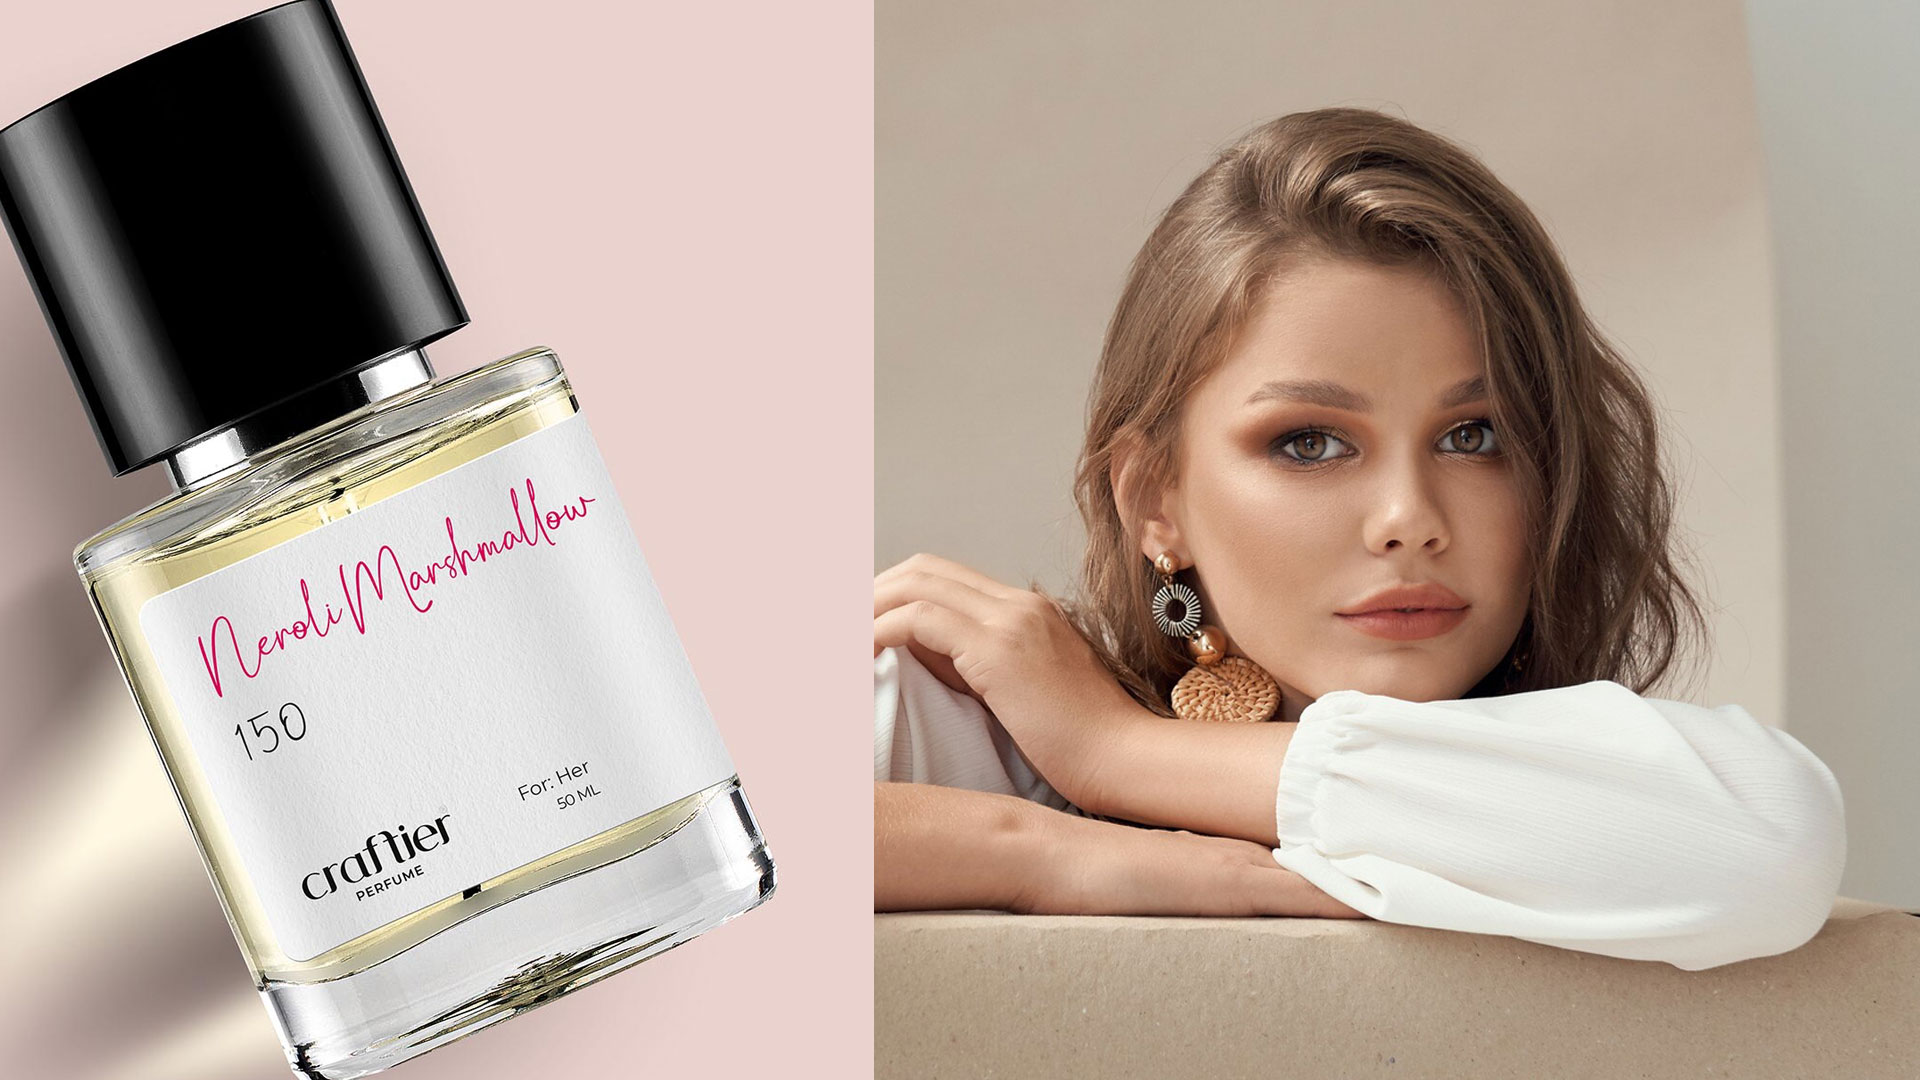 How Do Choose an Everyday Perfume That Matches Your Style and Personality? ​